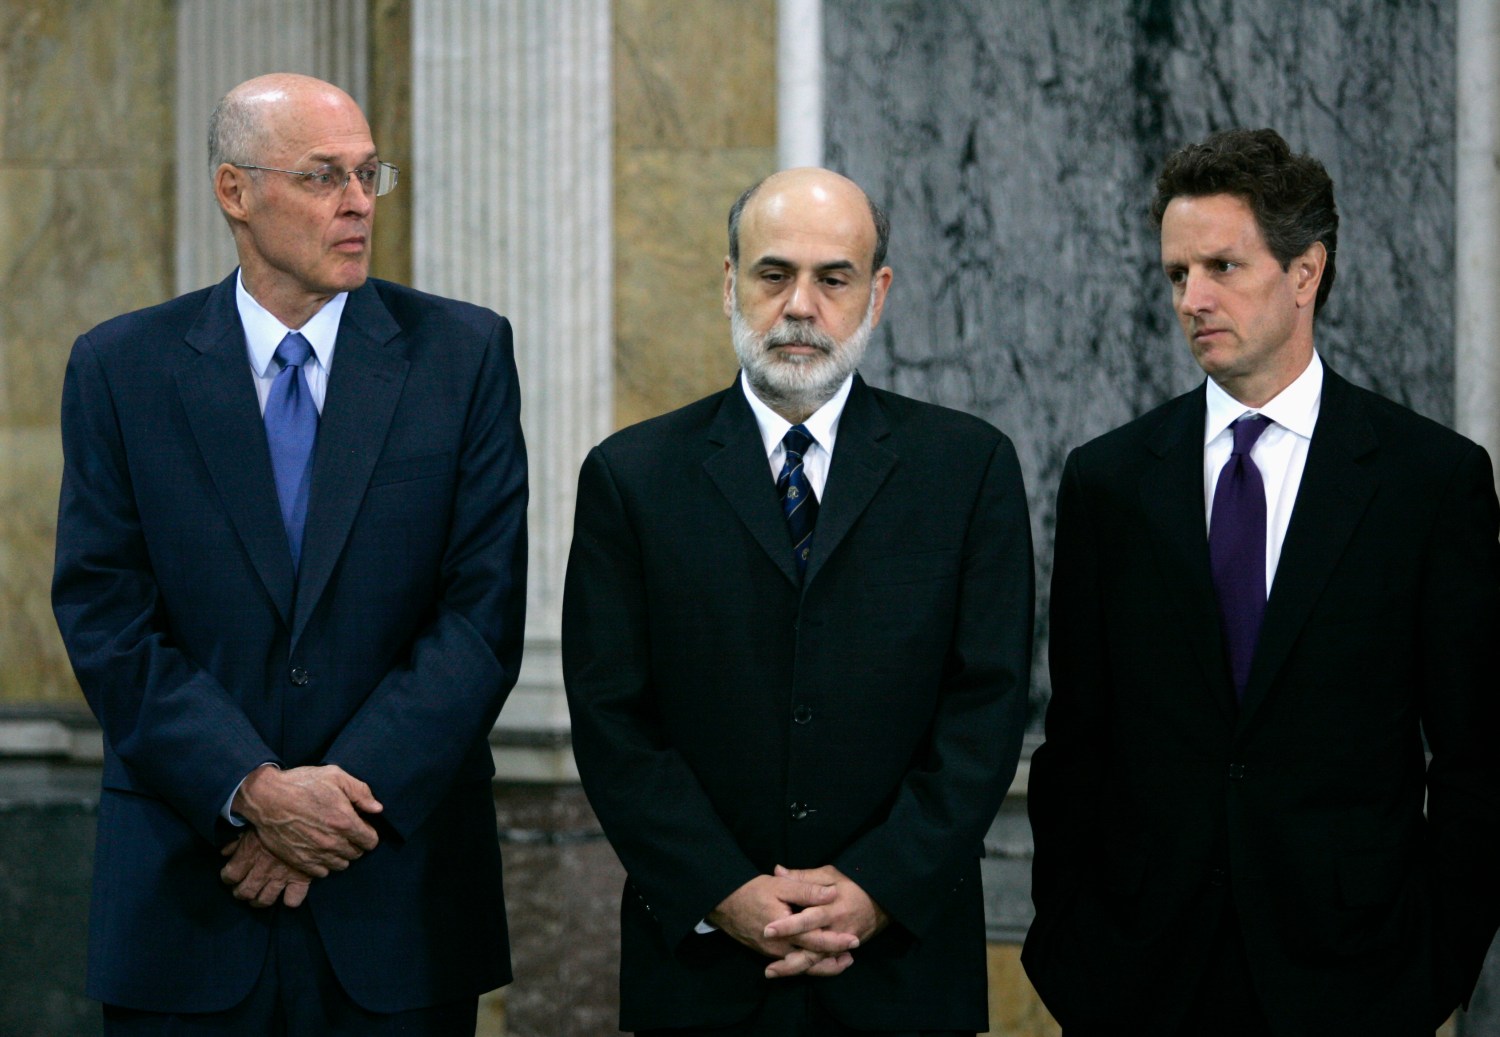 U.S. Treasury Secretary Henry Paulson (L), Federal Reserve Chairman Ben Bernanke (C) and President and CEO of the Federal Reserve Bank of New York Timothy F. Geithner listen as FDIC Chairman Sheila Bair (not pictured) speaks at the Treasury Department Cash Room in Washington.